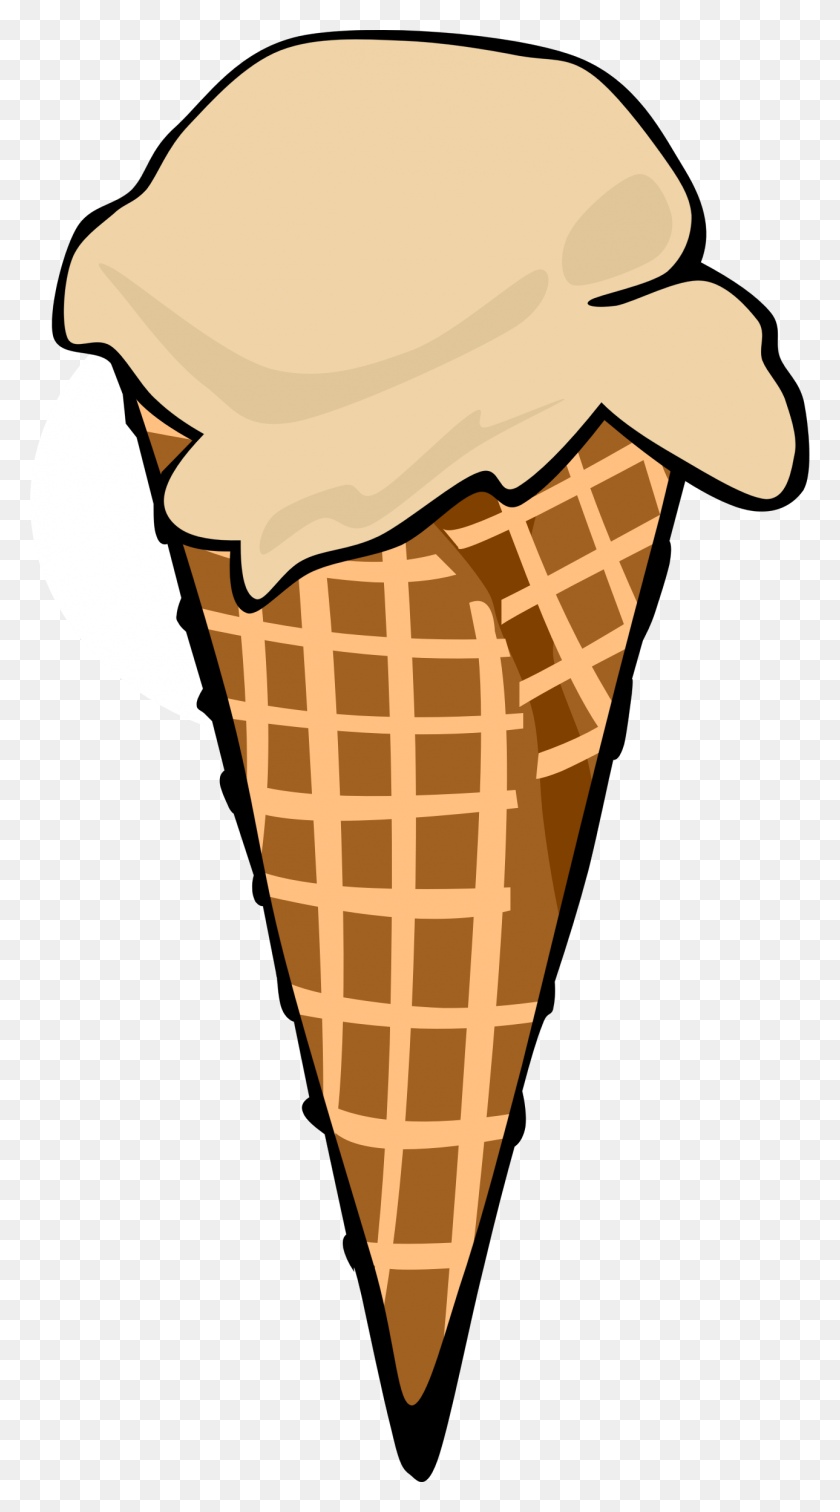 1289x2400 Free Images Of Ice Cream Conos Download Free Clipart Free Clip - Pistachio Clipart